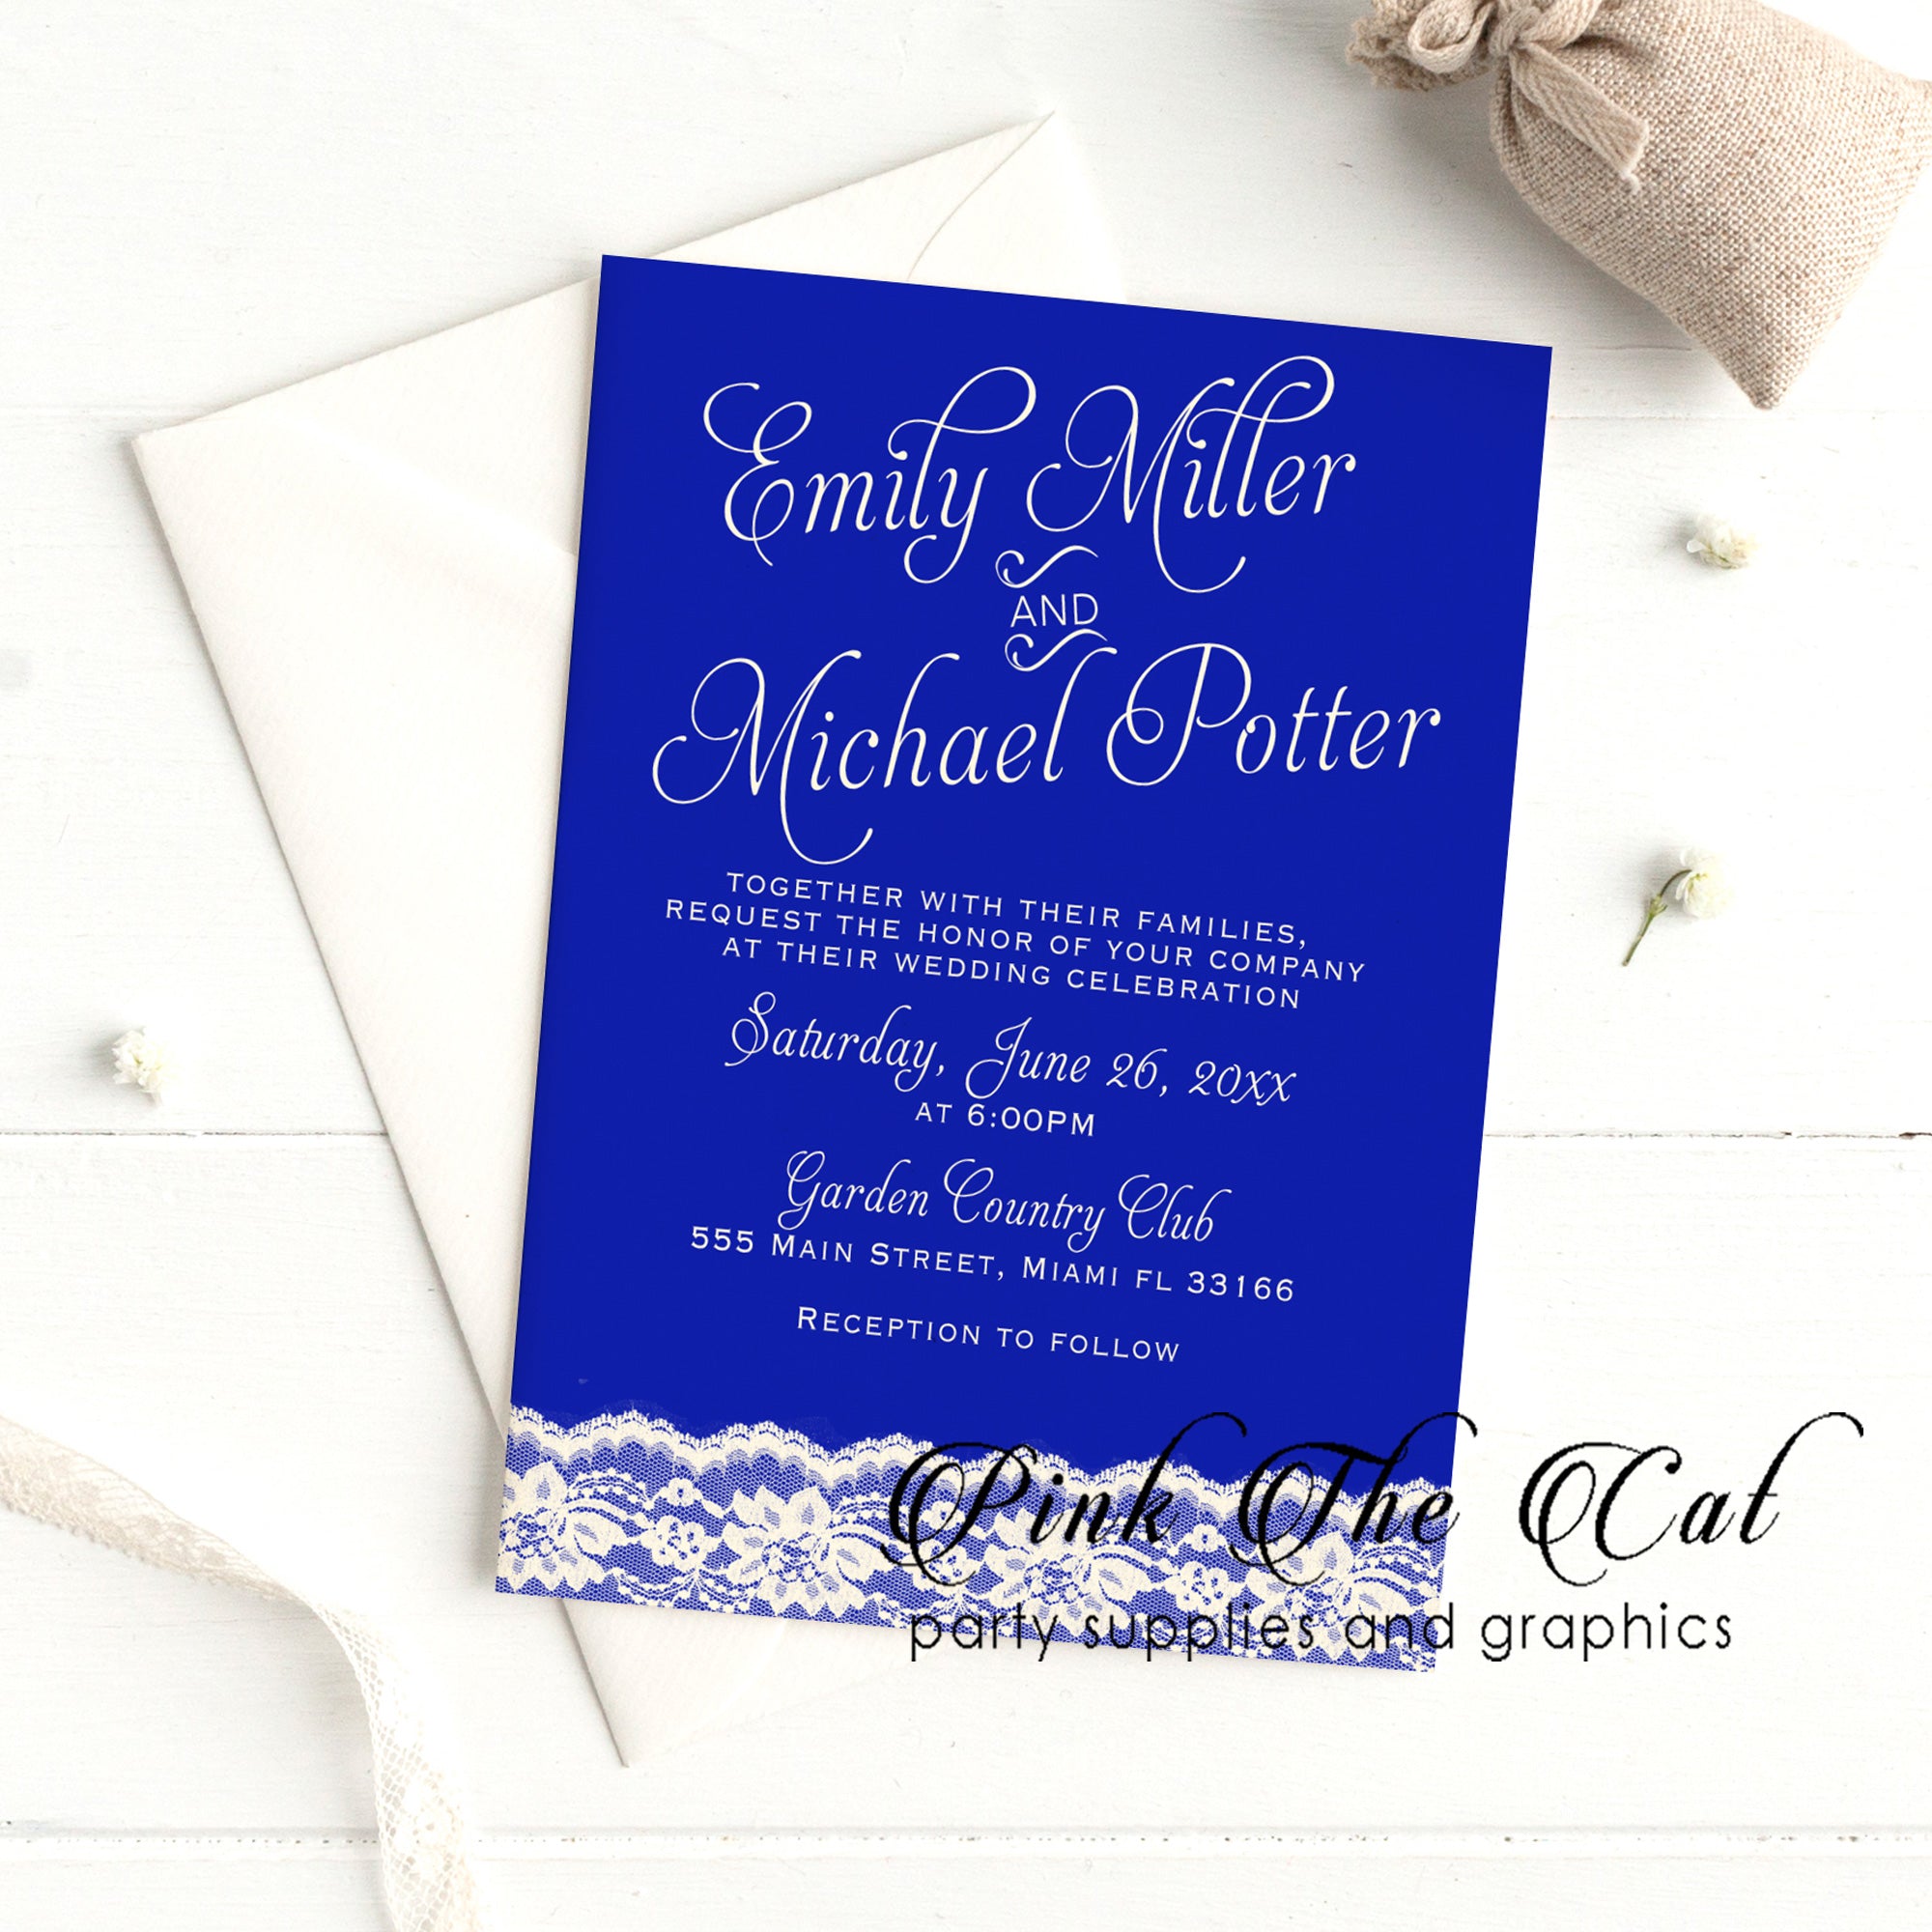 100 invitations royal blue lace wedding personalized with envelopes